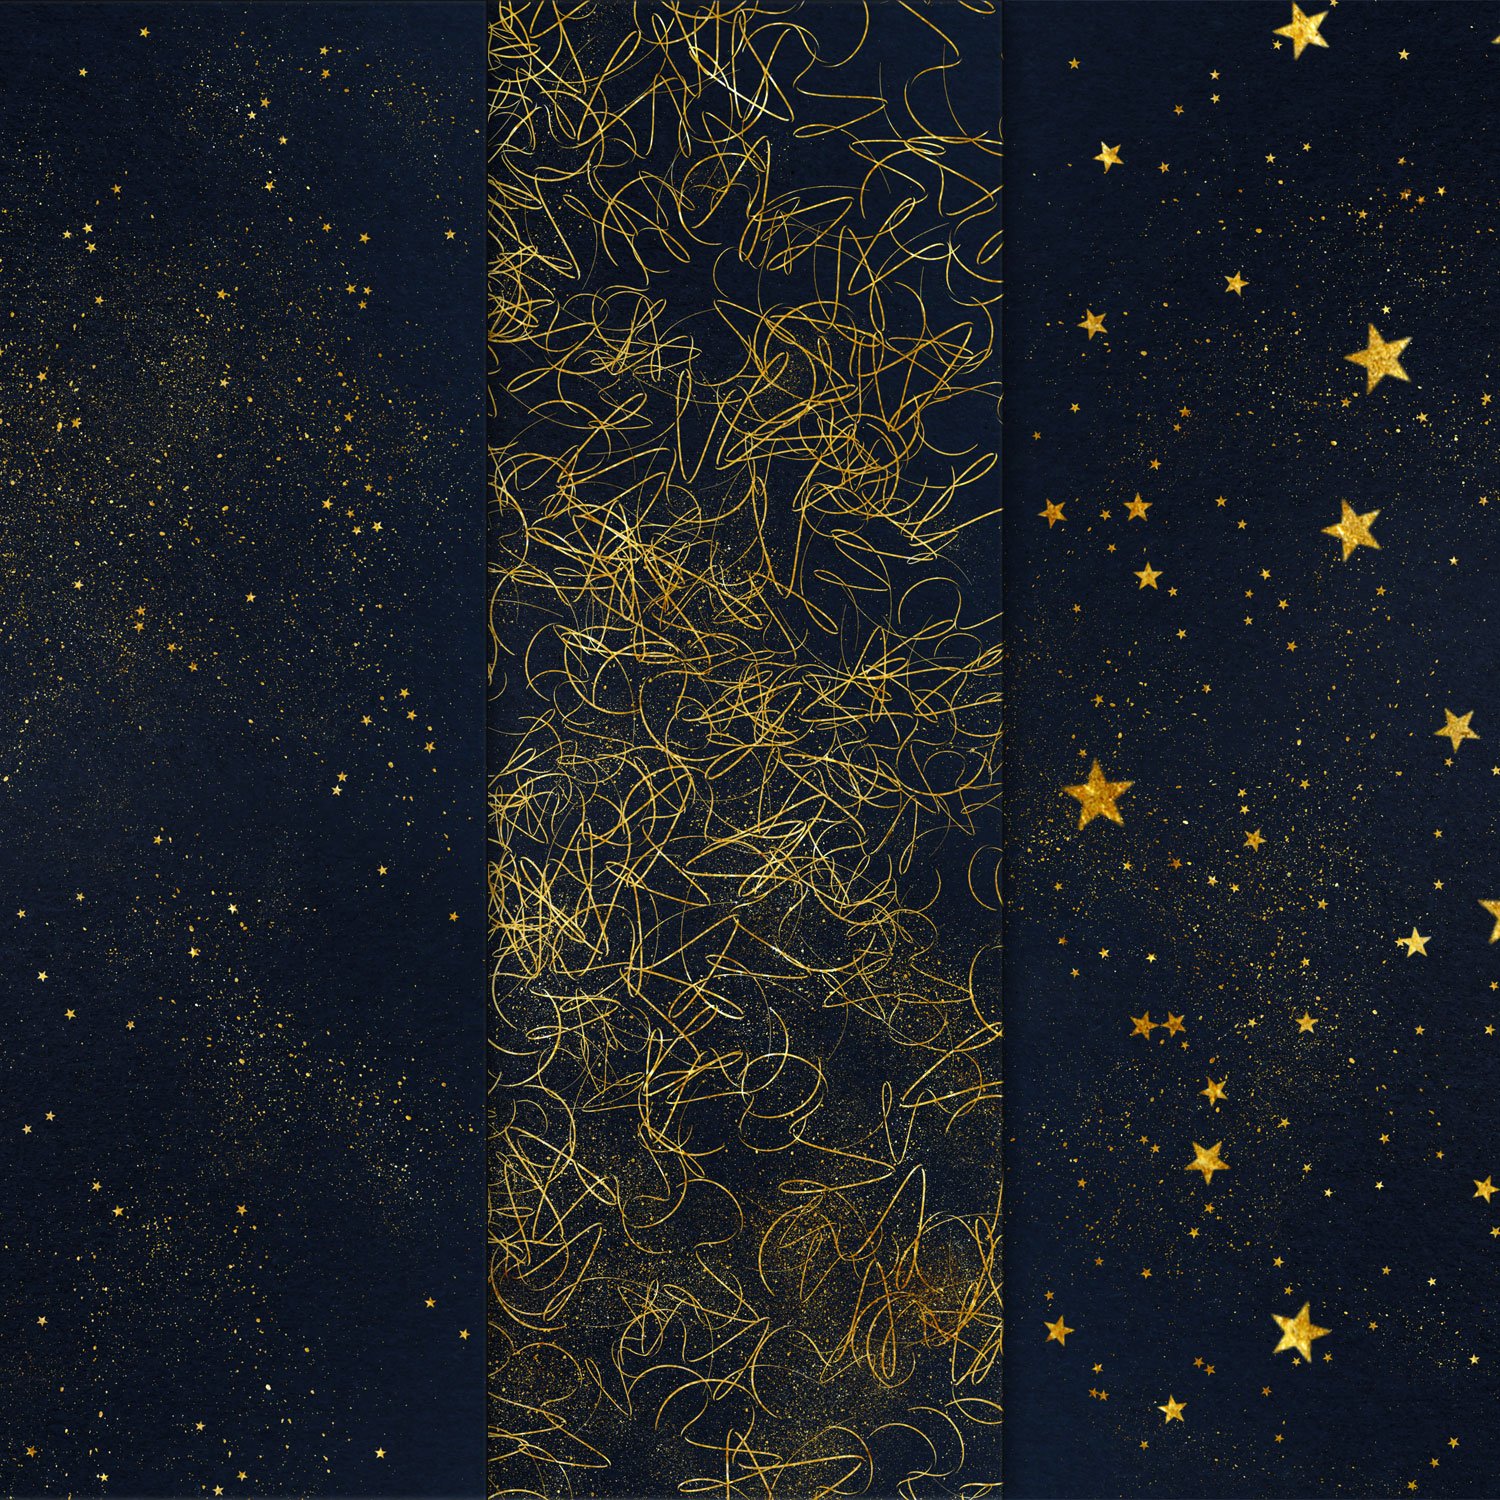 Some stars ornaments in gold.